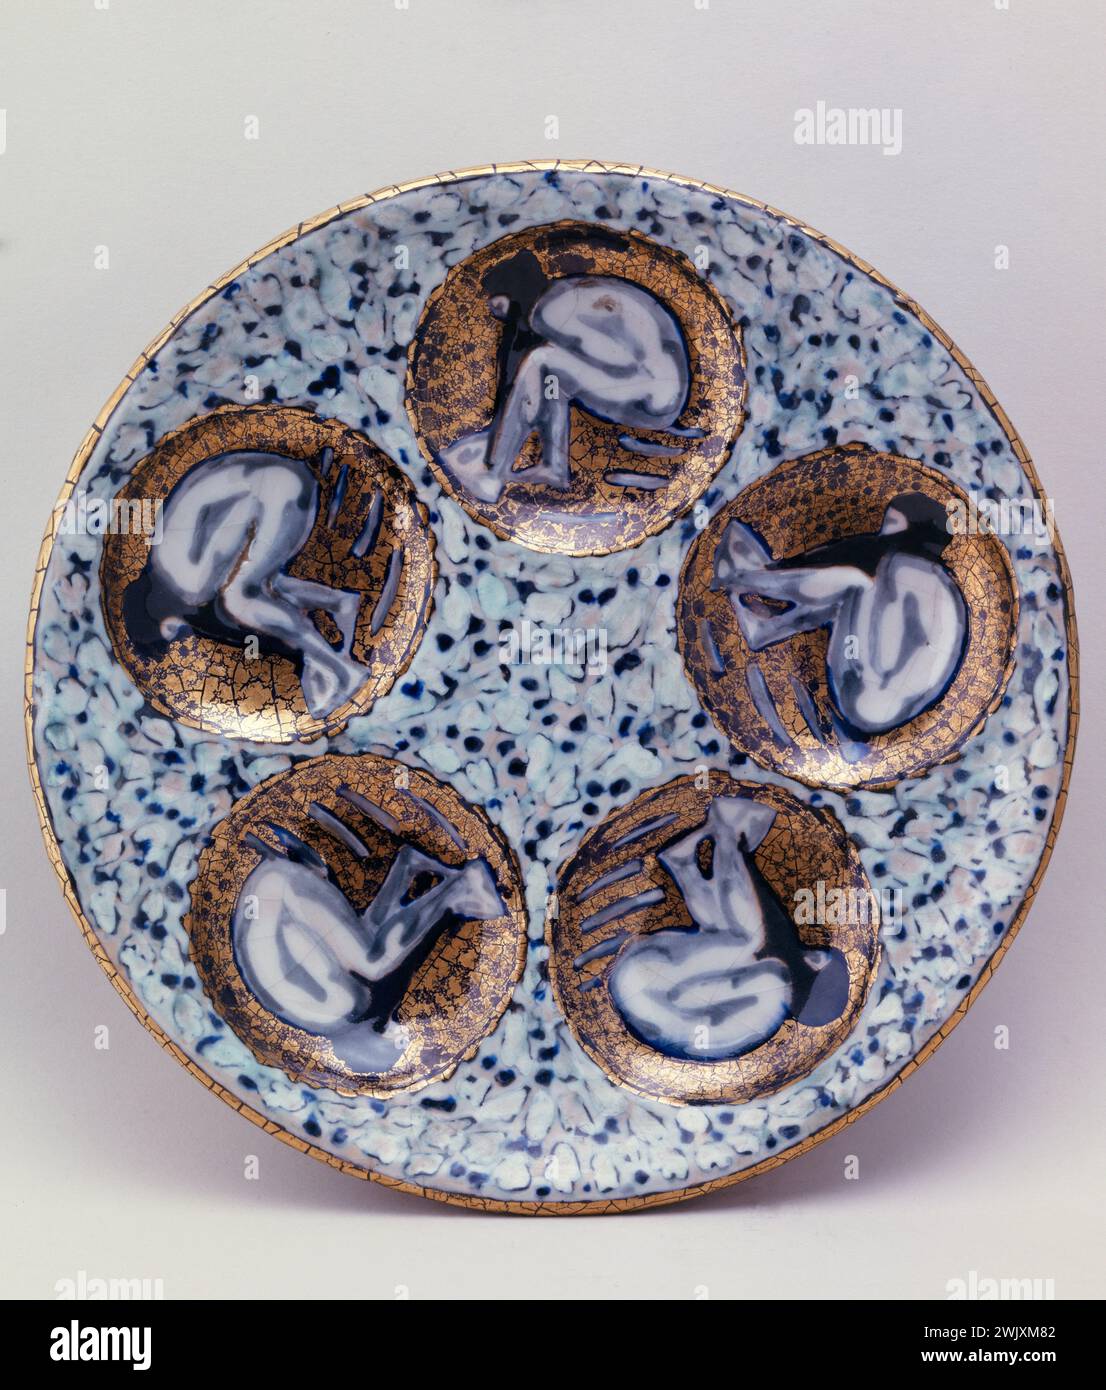 André Metthey (1871-1920). Plate. Earthenware. Museum of Fine Arts of the City of Paris, Petit Palais. Art Menager, Faience, Crockery, XIXth 19th 19th 19 19th 19th century, plate Stock Photo